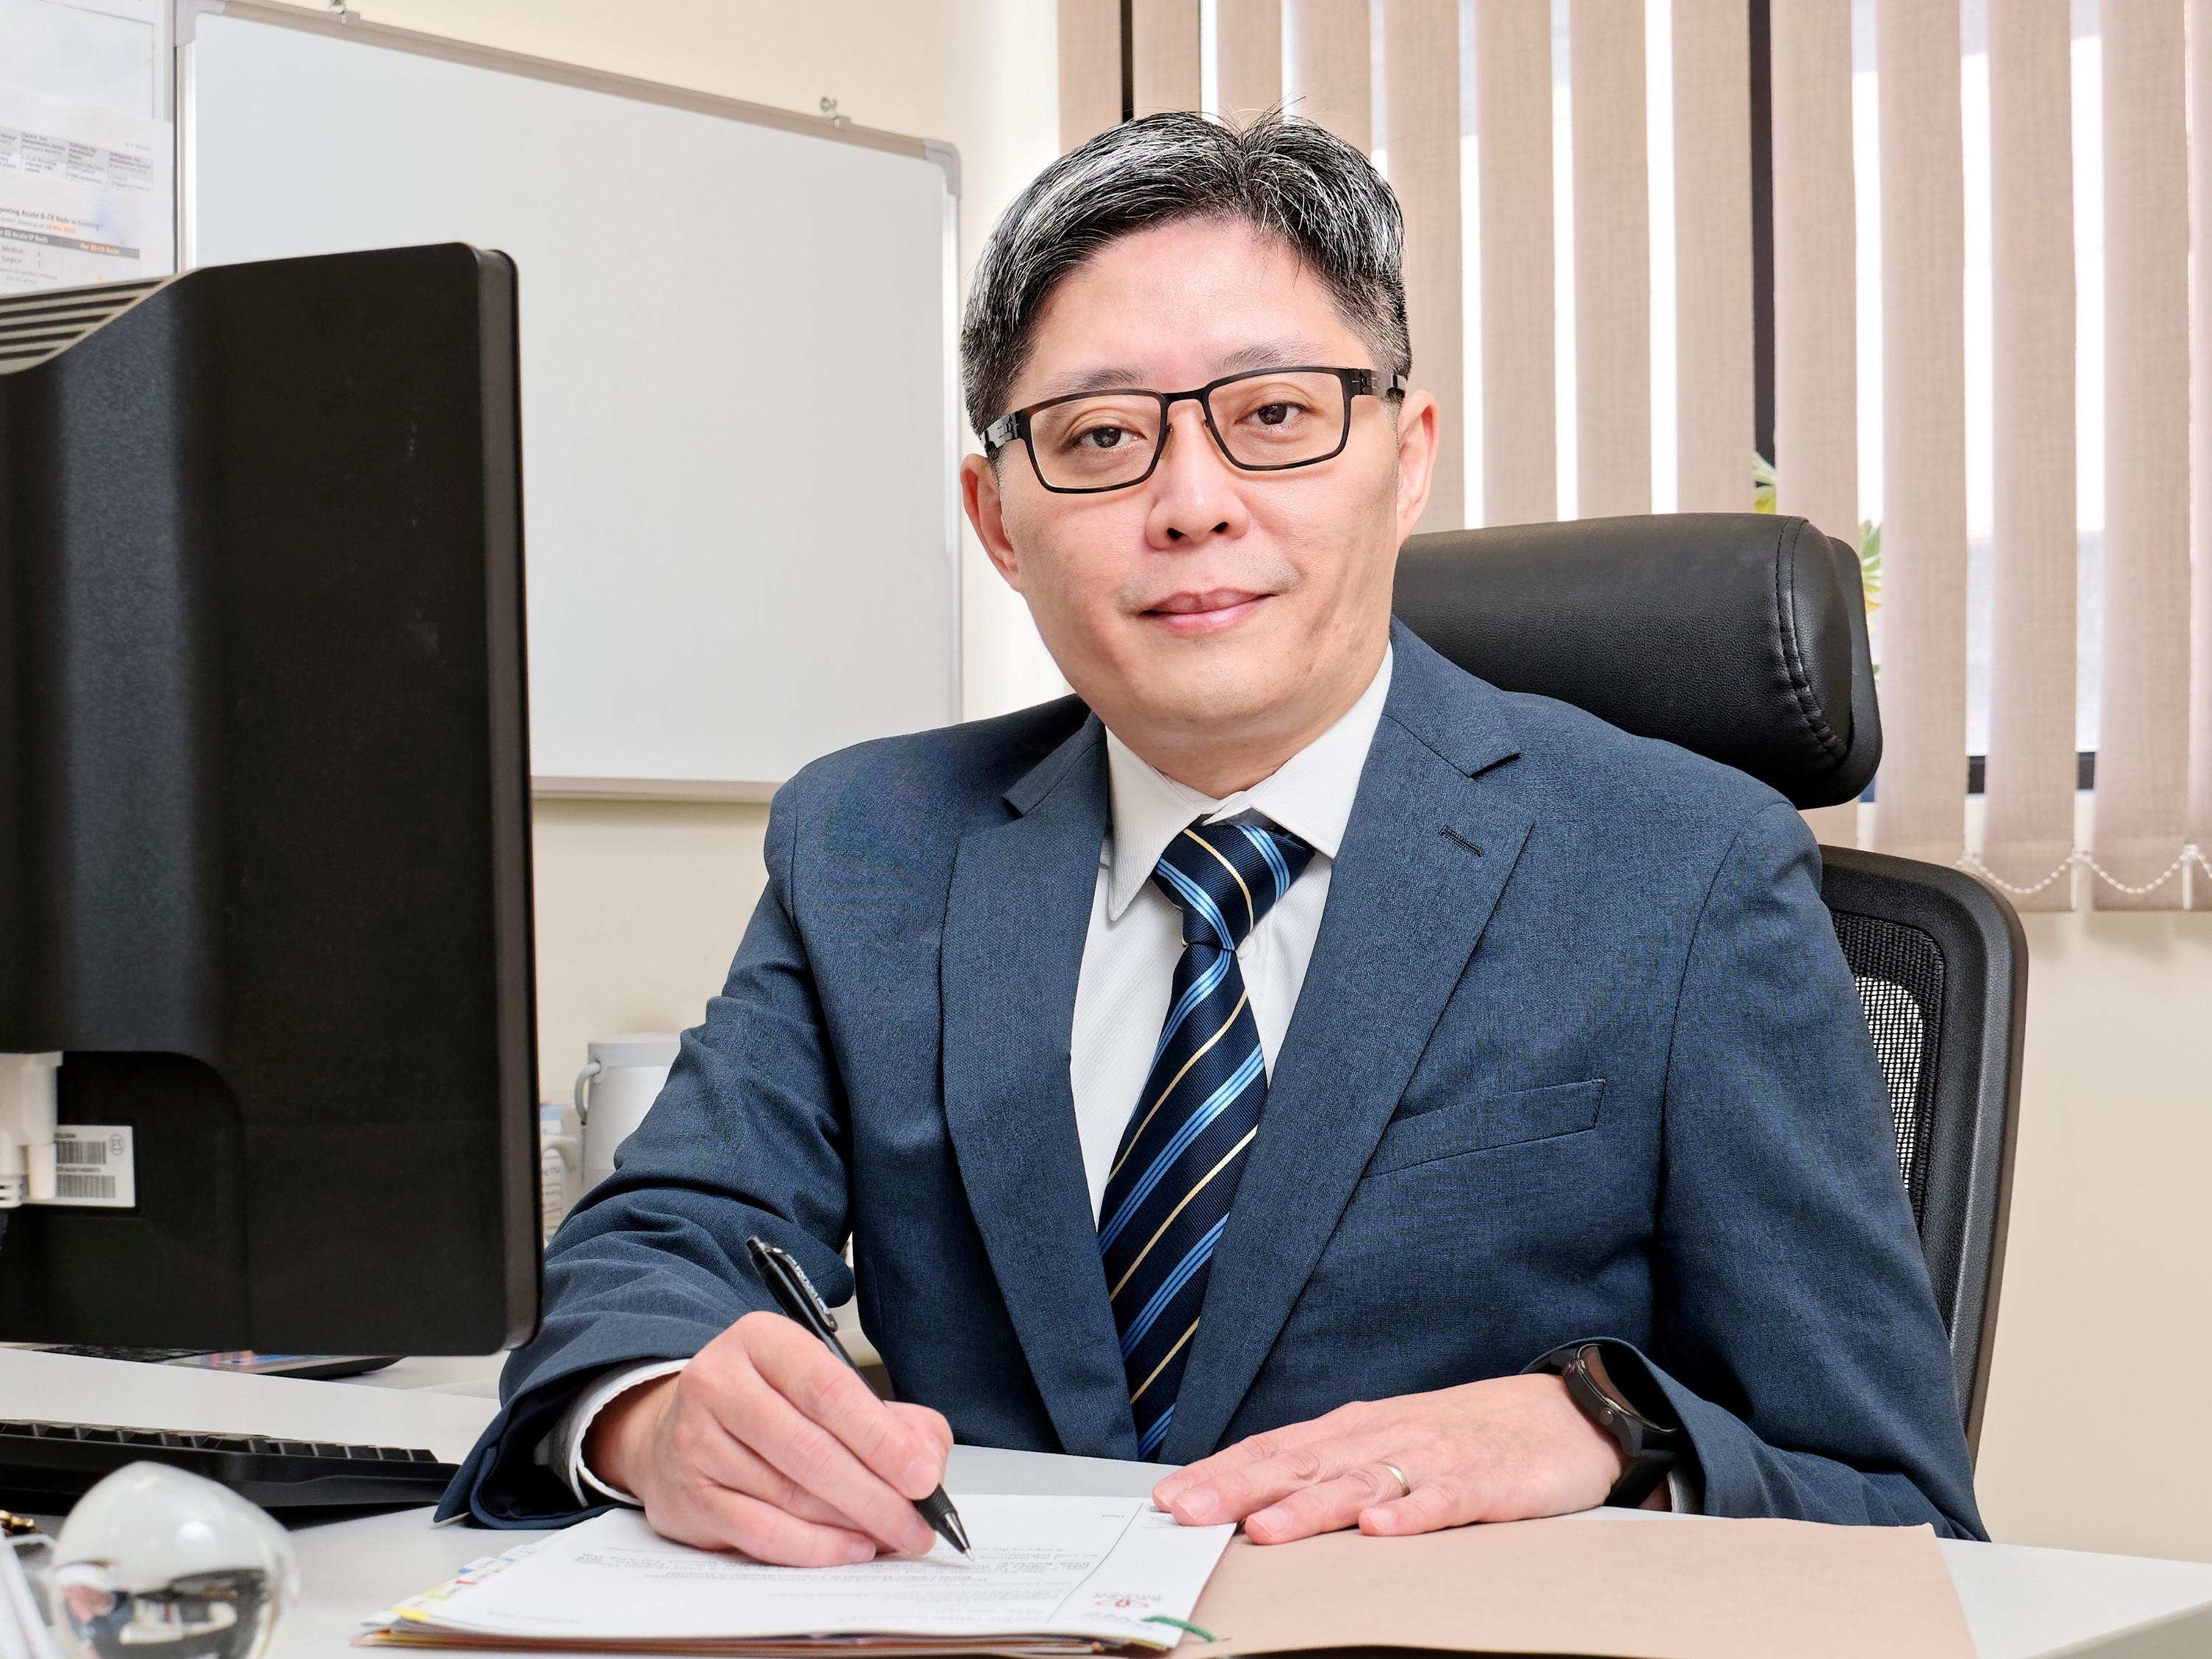 The Hospital Authority announced today (September 22) that Dr Tsang Chi-chung will be appointed as the Hospital Chief Executive of Kowloon Hospital and Hong Kong Eye Hospital with effect from November 25, 2022.